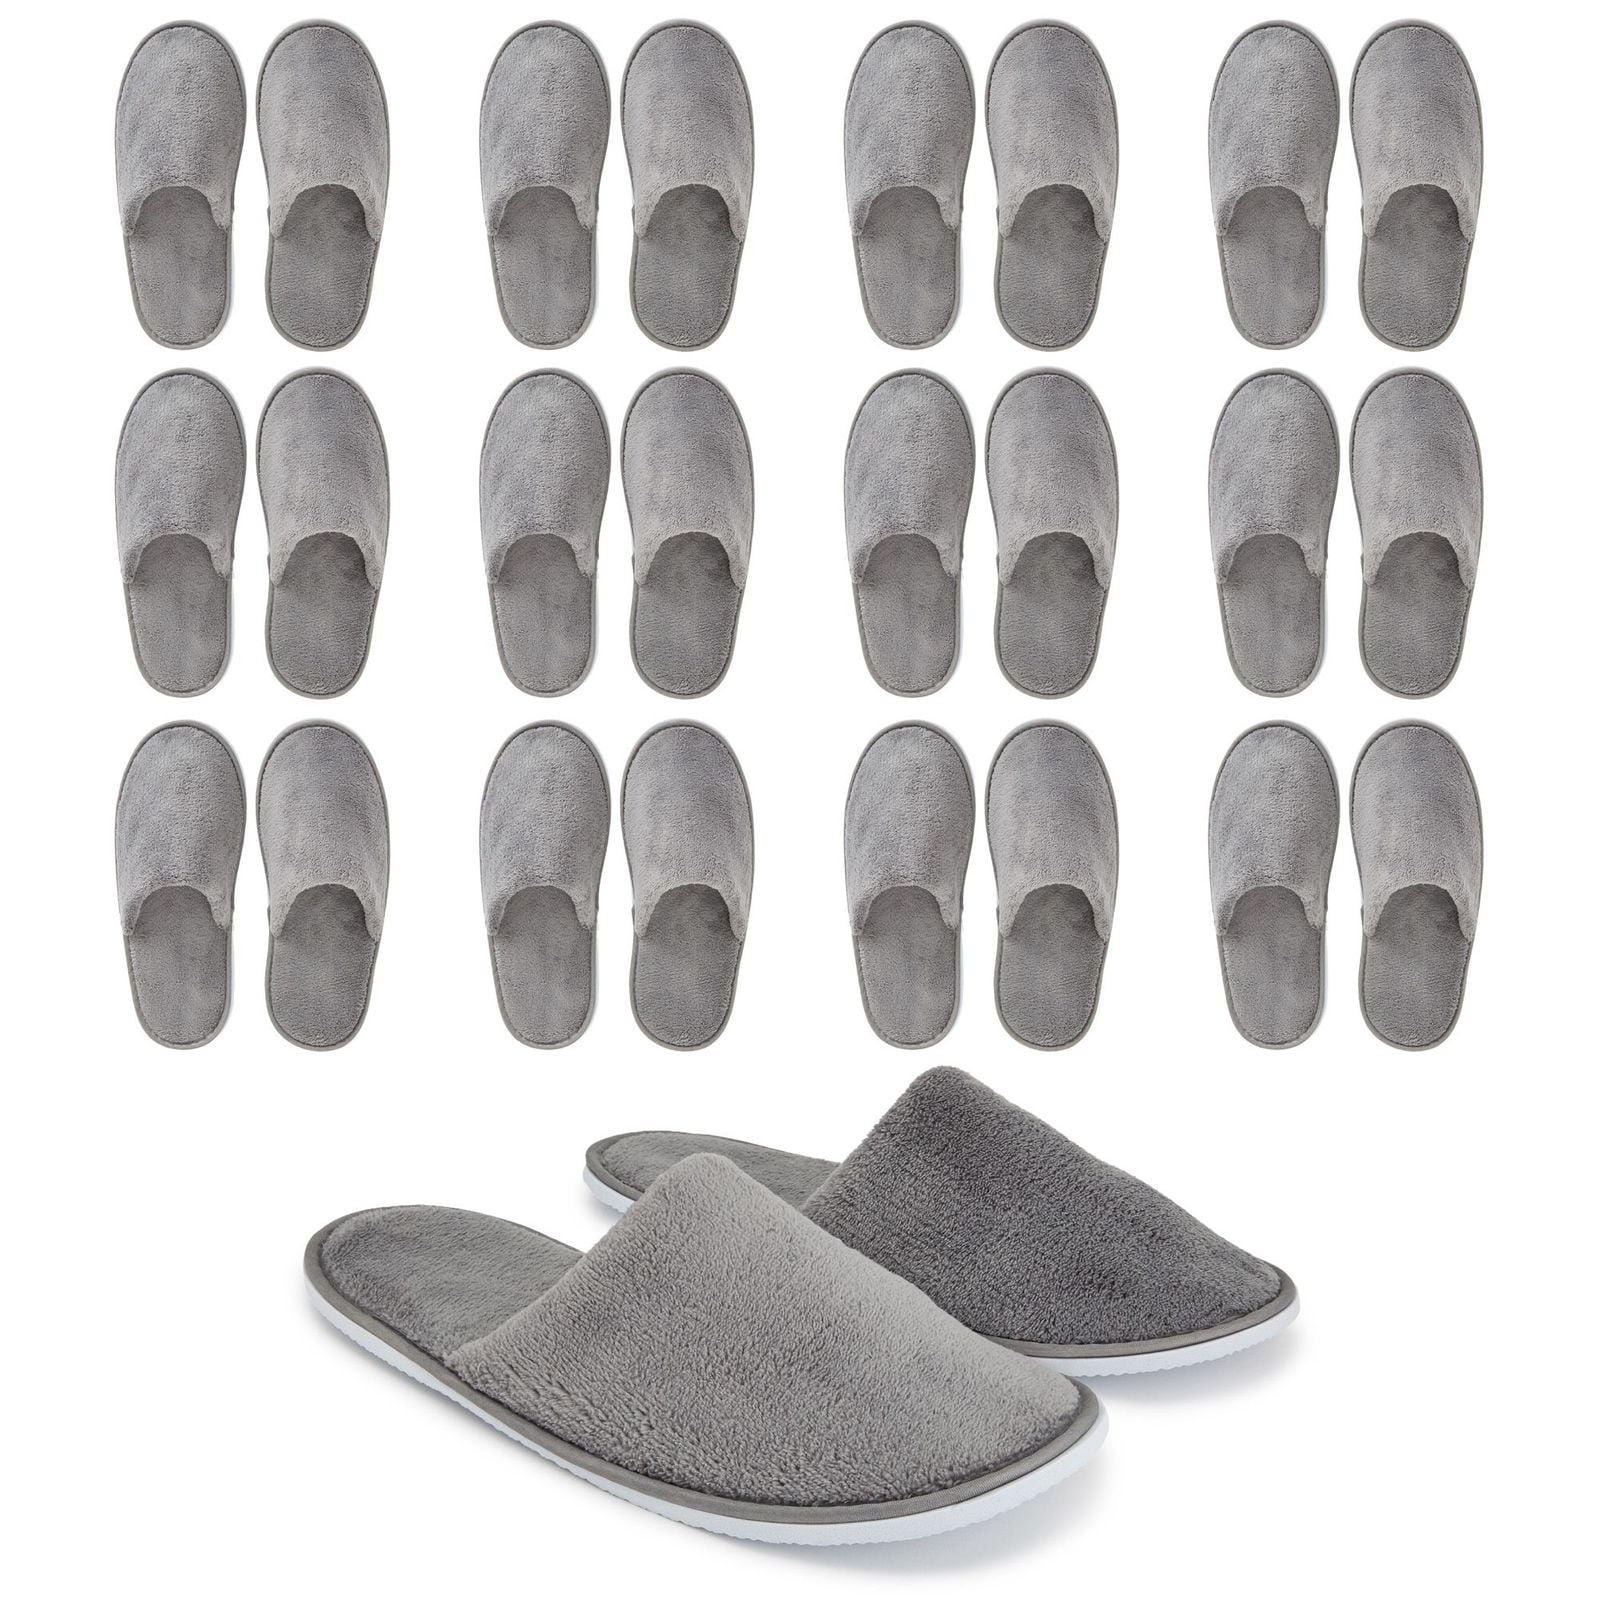 Hotel Use Aneco 6 Pairs Spa Slippers Disposable Closed Toe Slippers White Fluffy Guests Slippers for Home